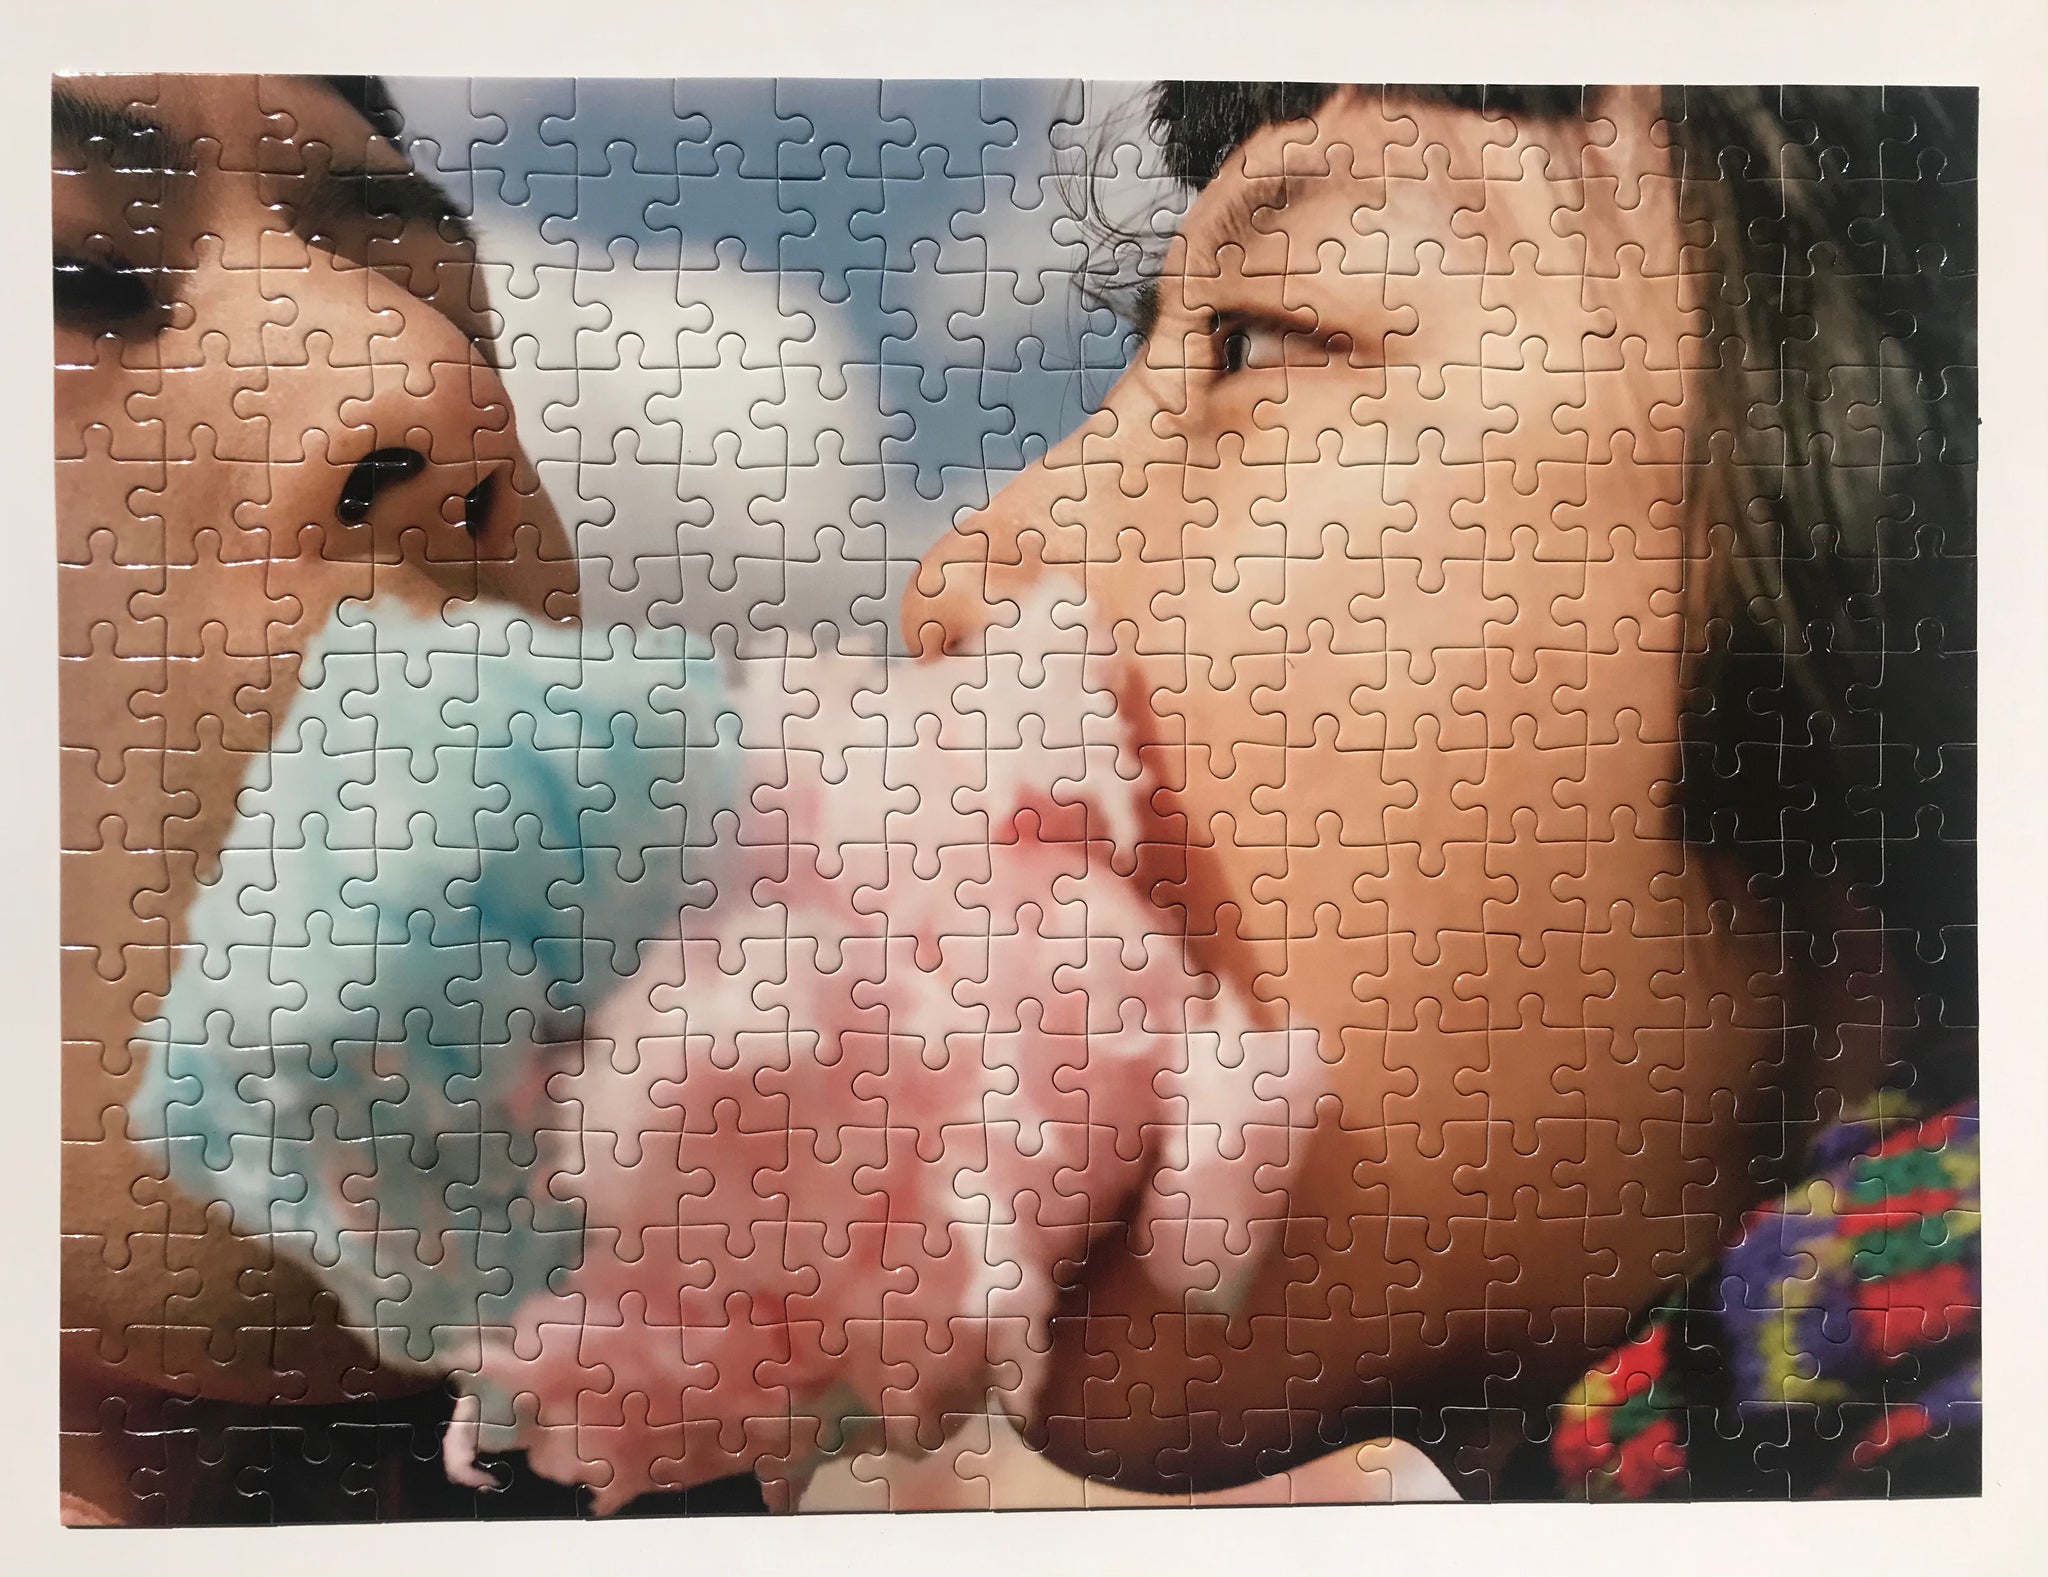 Artist Pixy Liao Collector Edition Jigsaw Puzzle